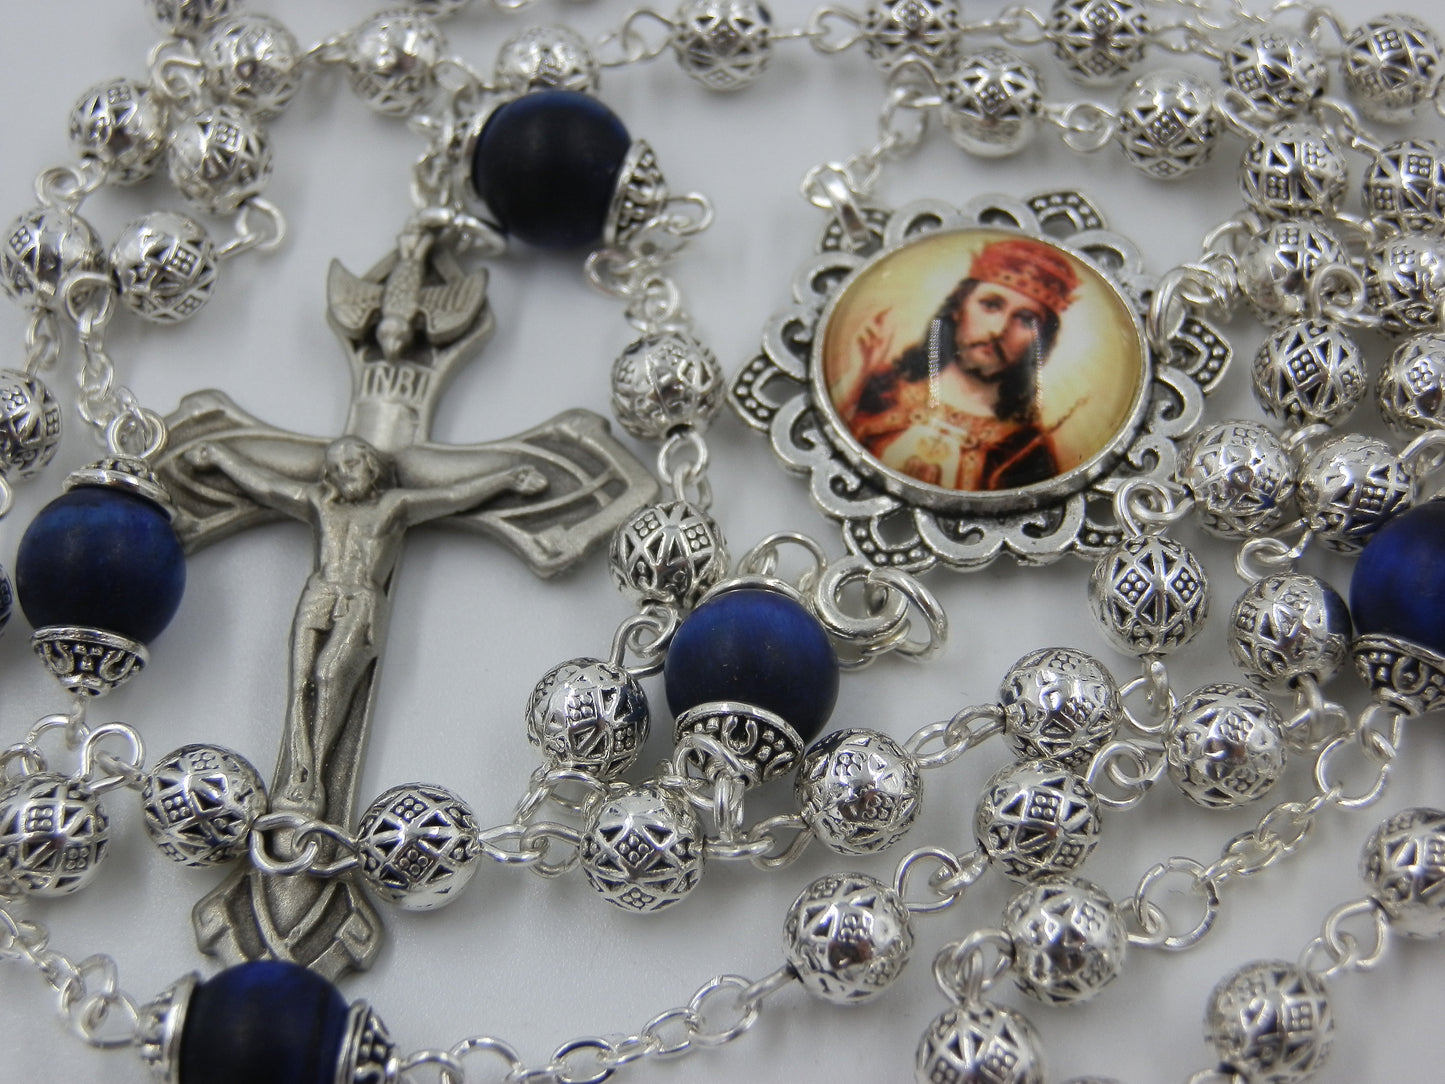 Christ The King Rosary beads, Silver Rosaries, Holy Spirit Pewter Crucifix, Lapis Lazuli rosaries, Rosary beads, Heirloom Rosaries.